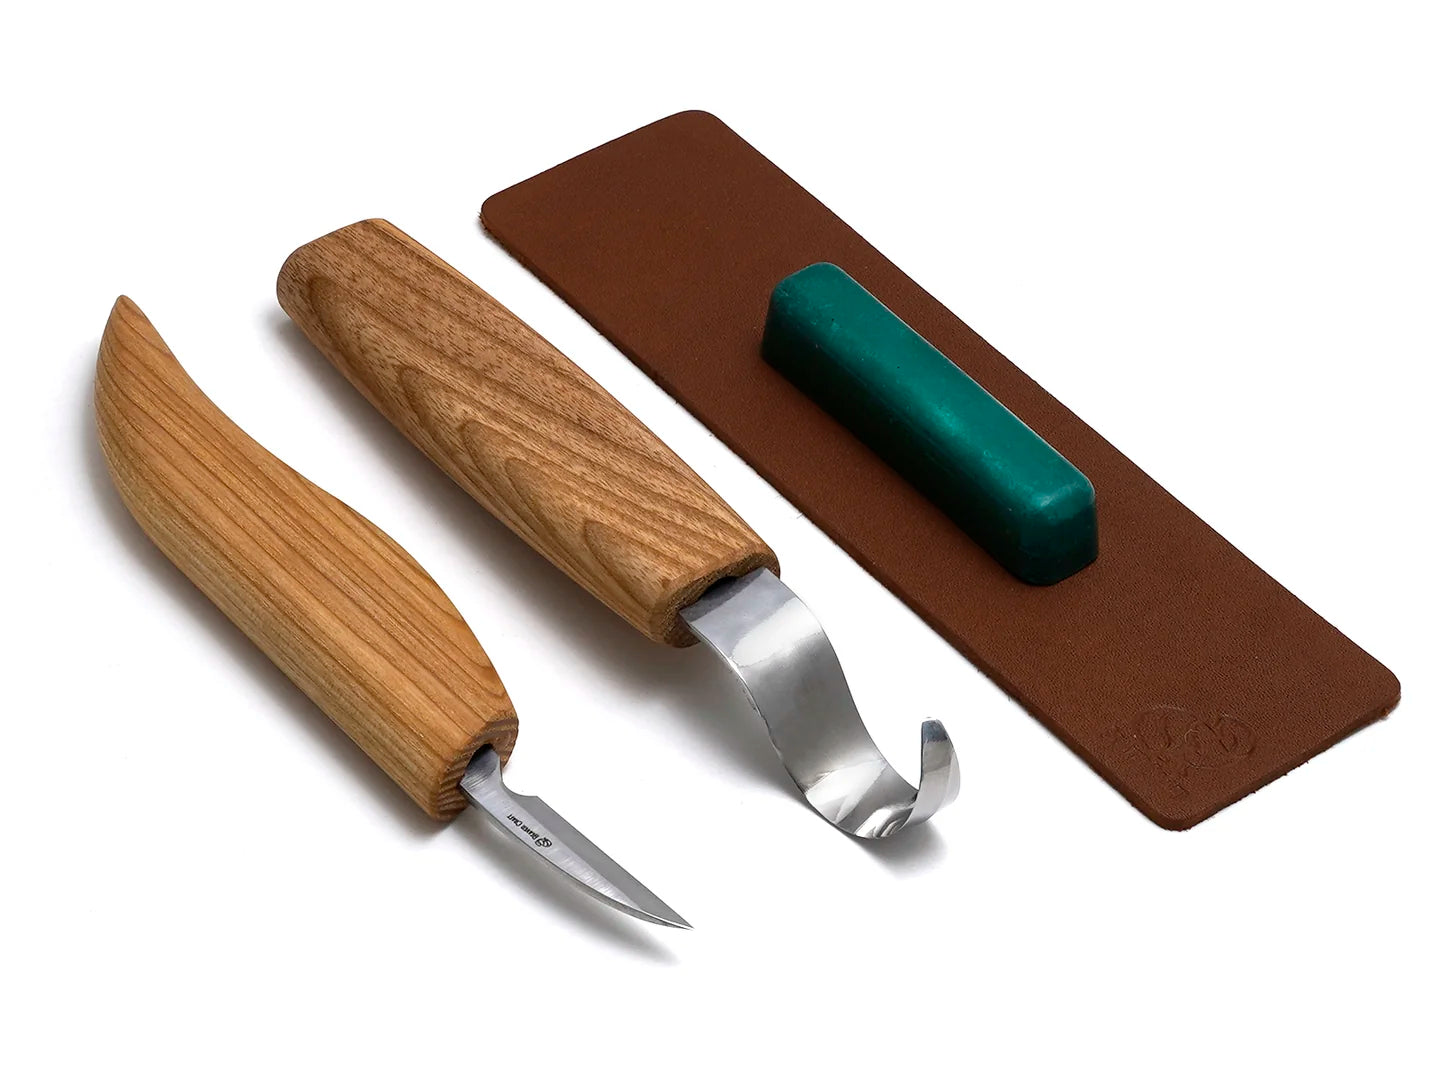 Spoon Carving Knives